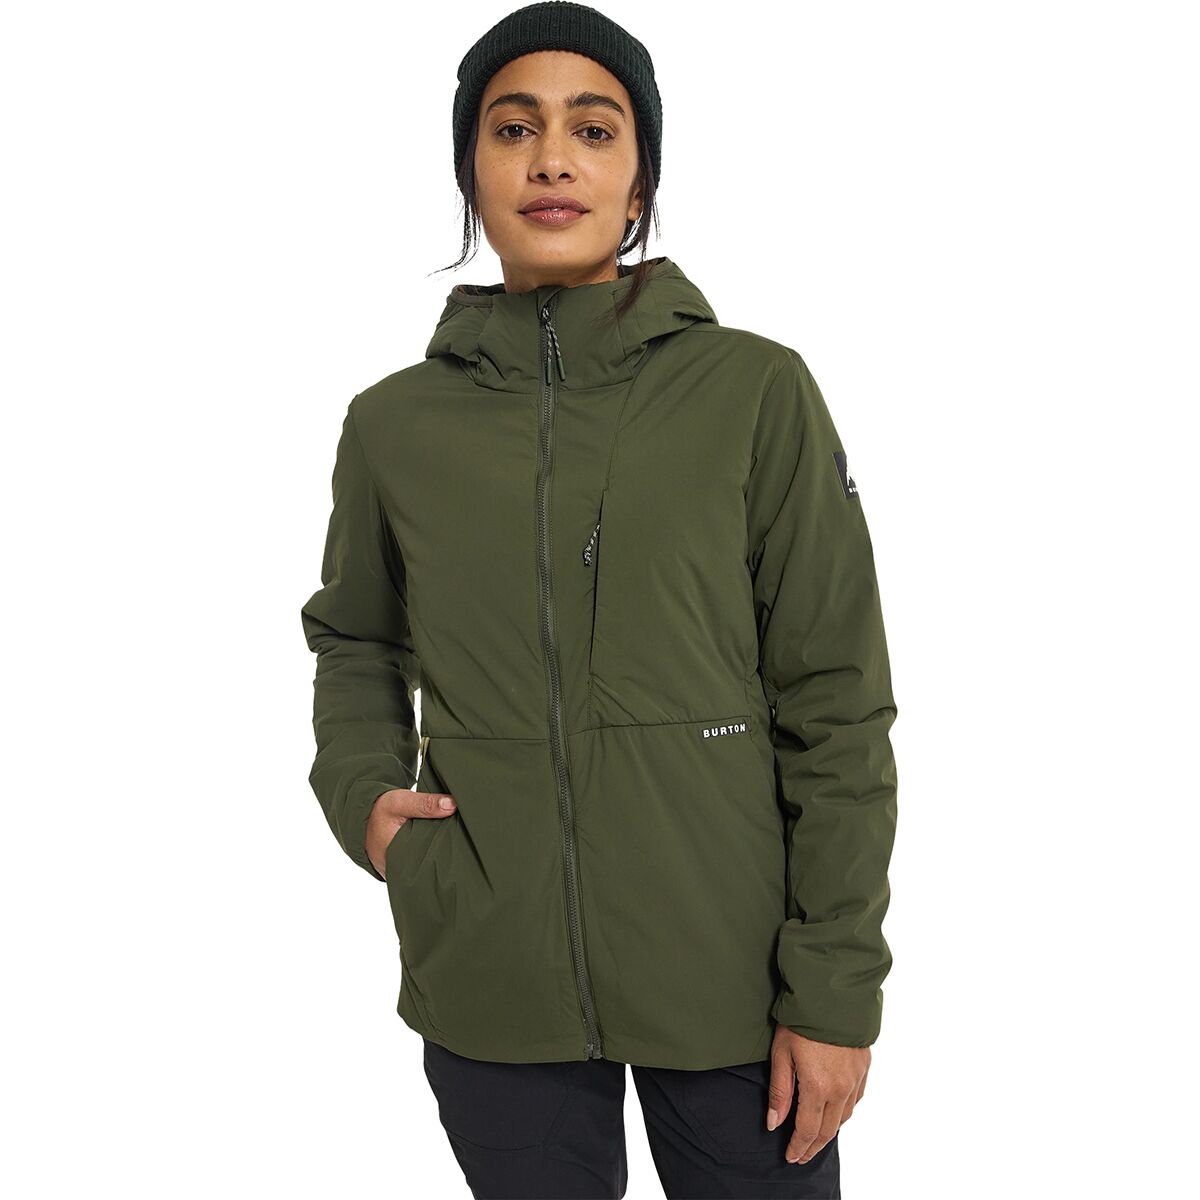 Multipath Insulated Hooded Jacket - Women